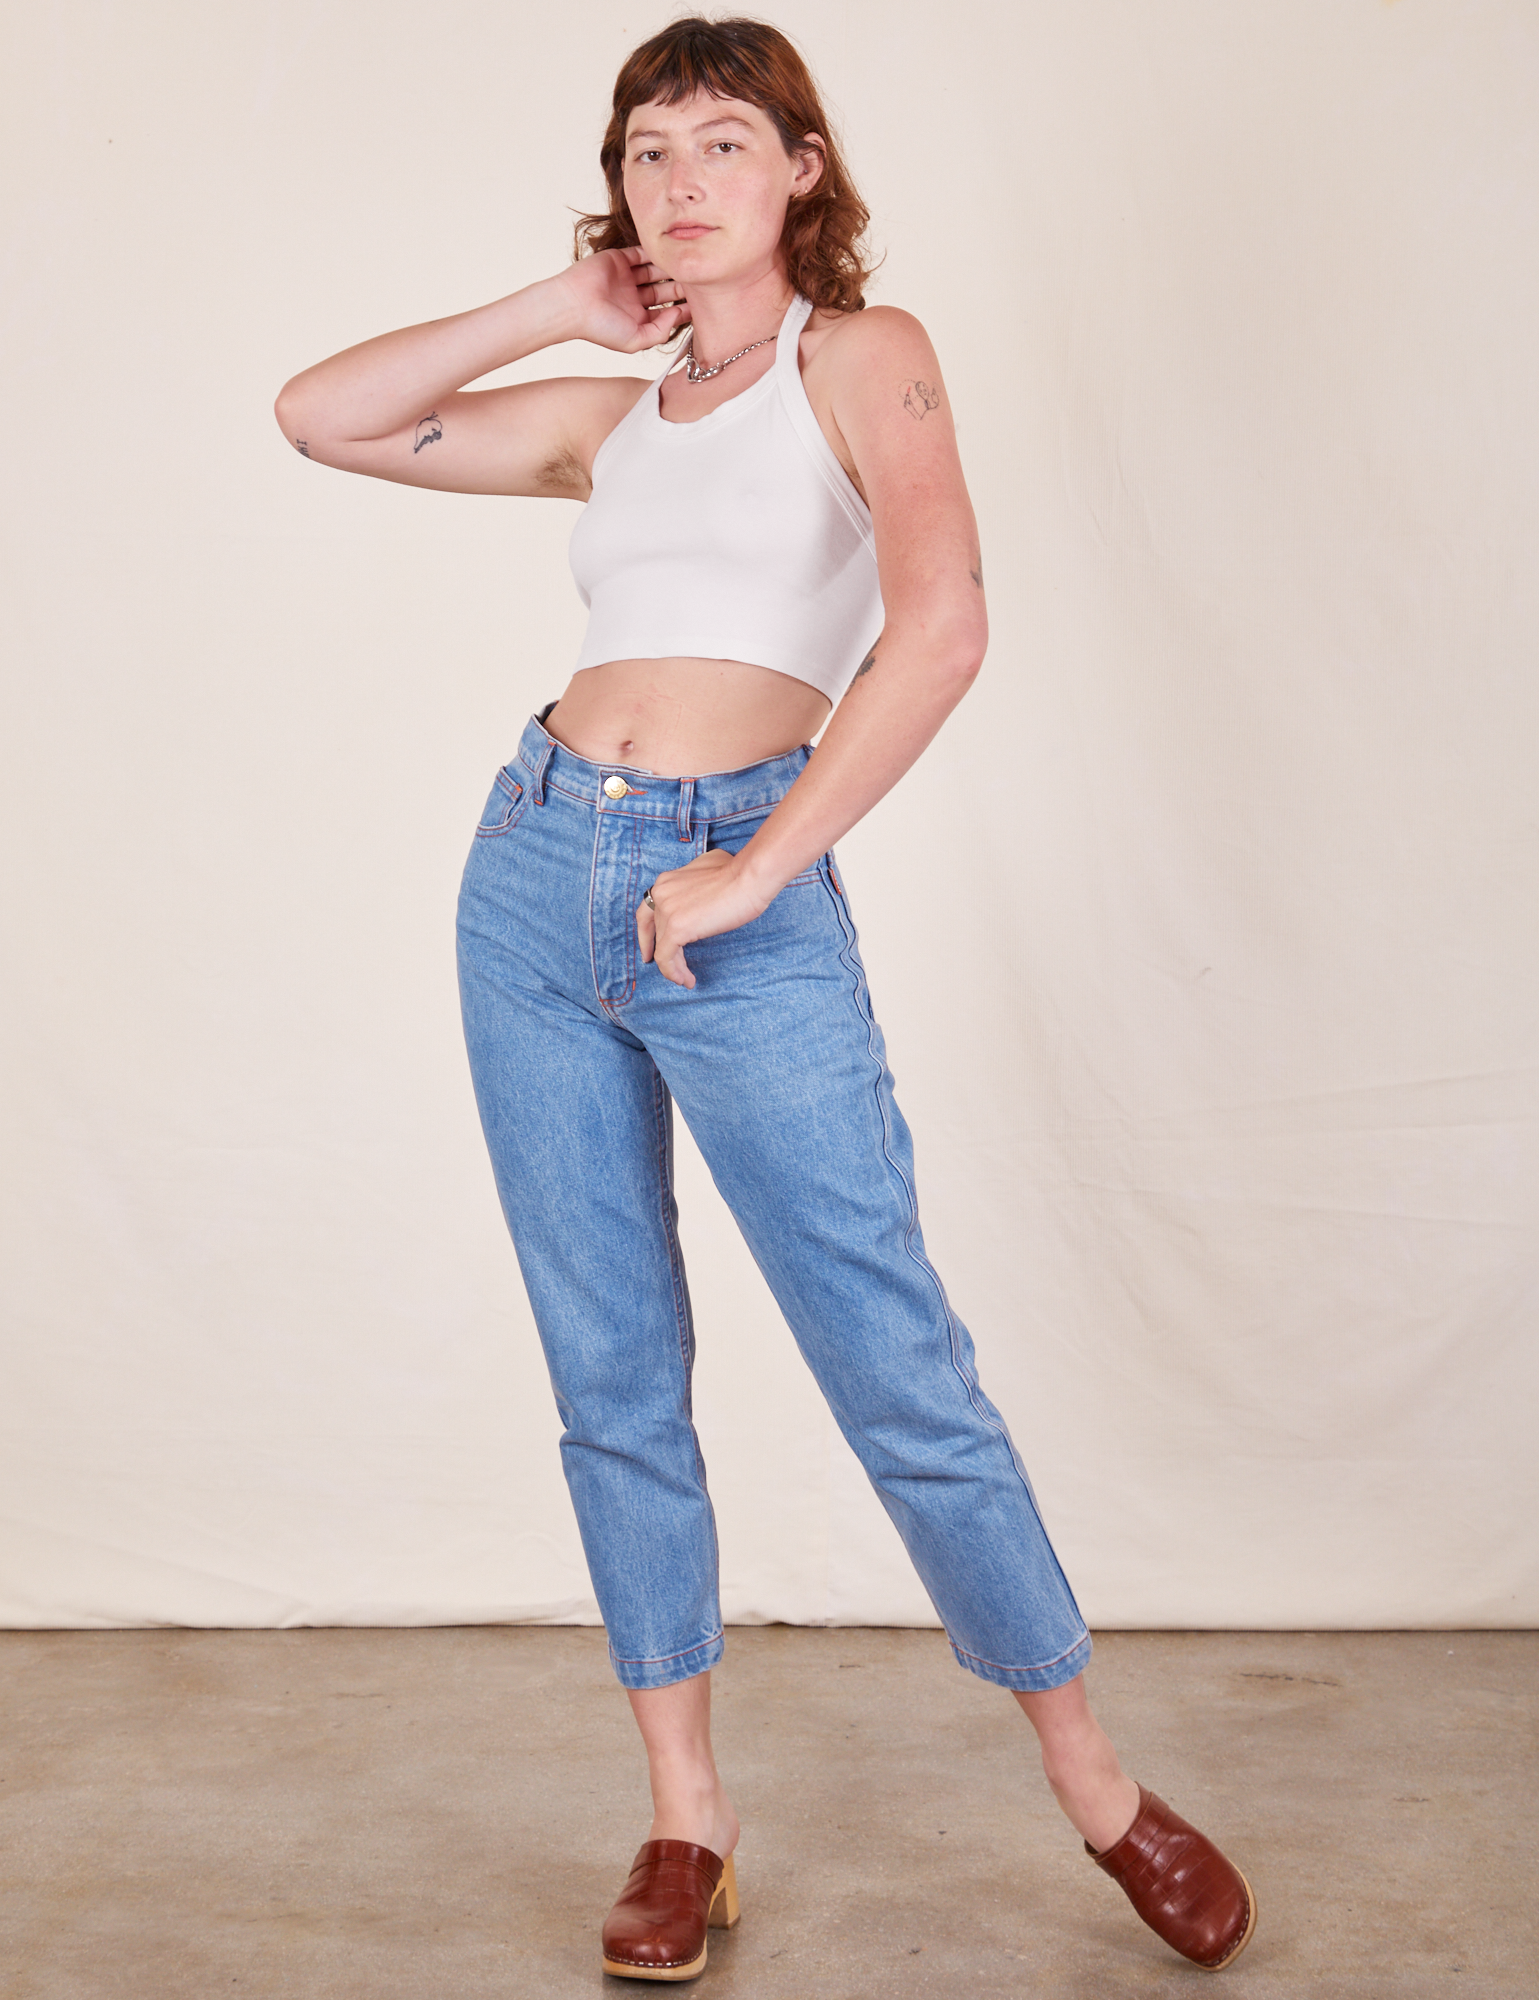 Alex is wearing Halter Top in Vintage Off-White and light wash Frontier Jeans